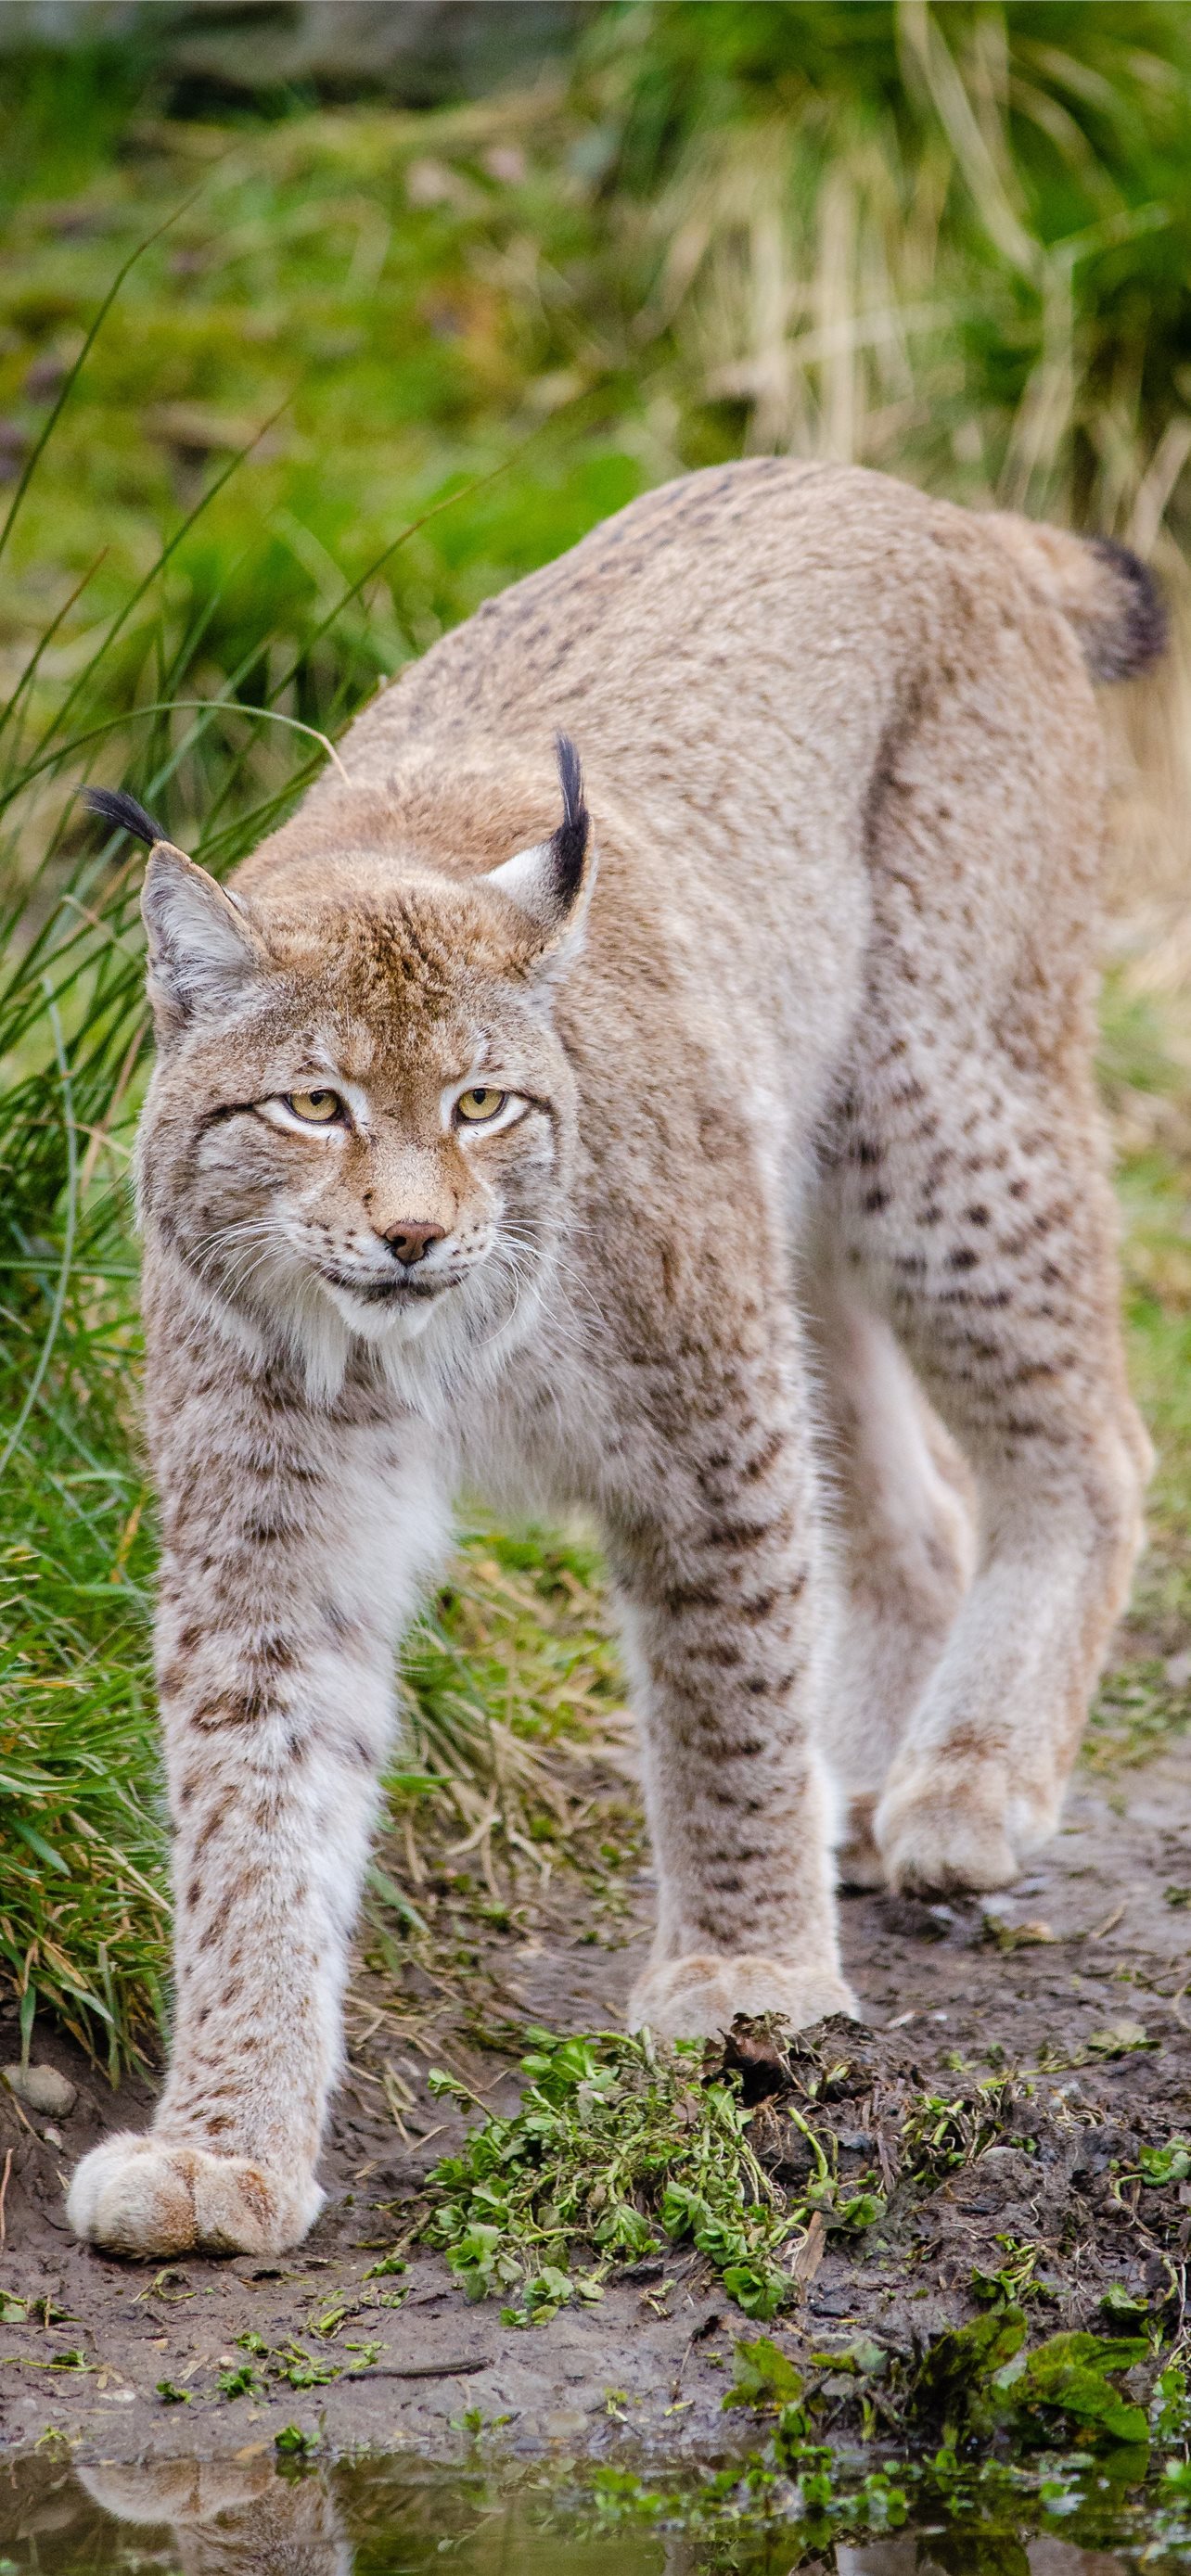 Bobcat Background Images HD Pictures and Wallpaper For Free Download   Pngtree